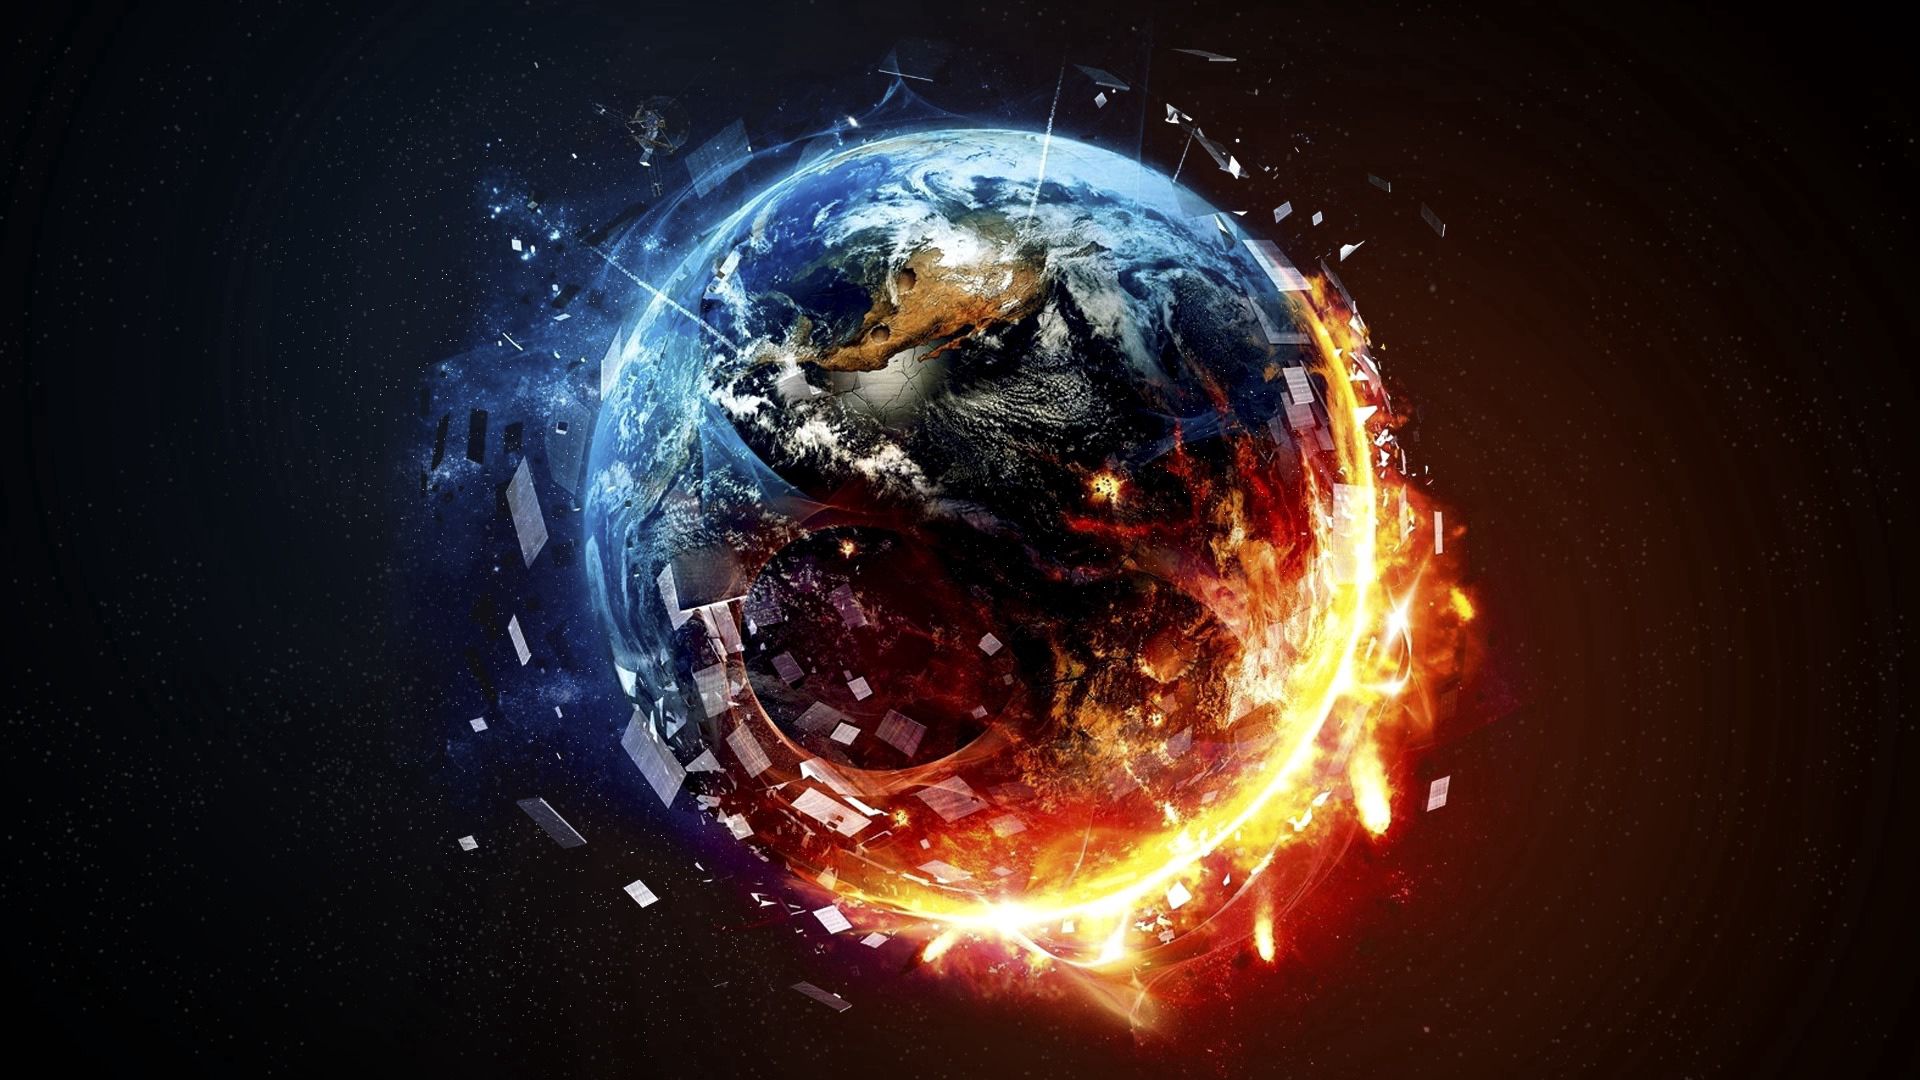 112448 download wallpaper fire, abstract, universe, planet screensavers and pictures for free